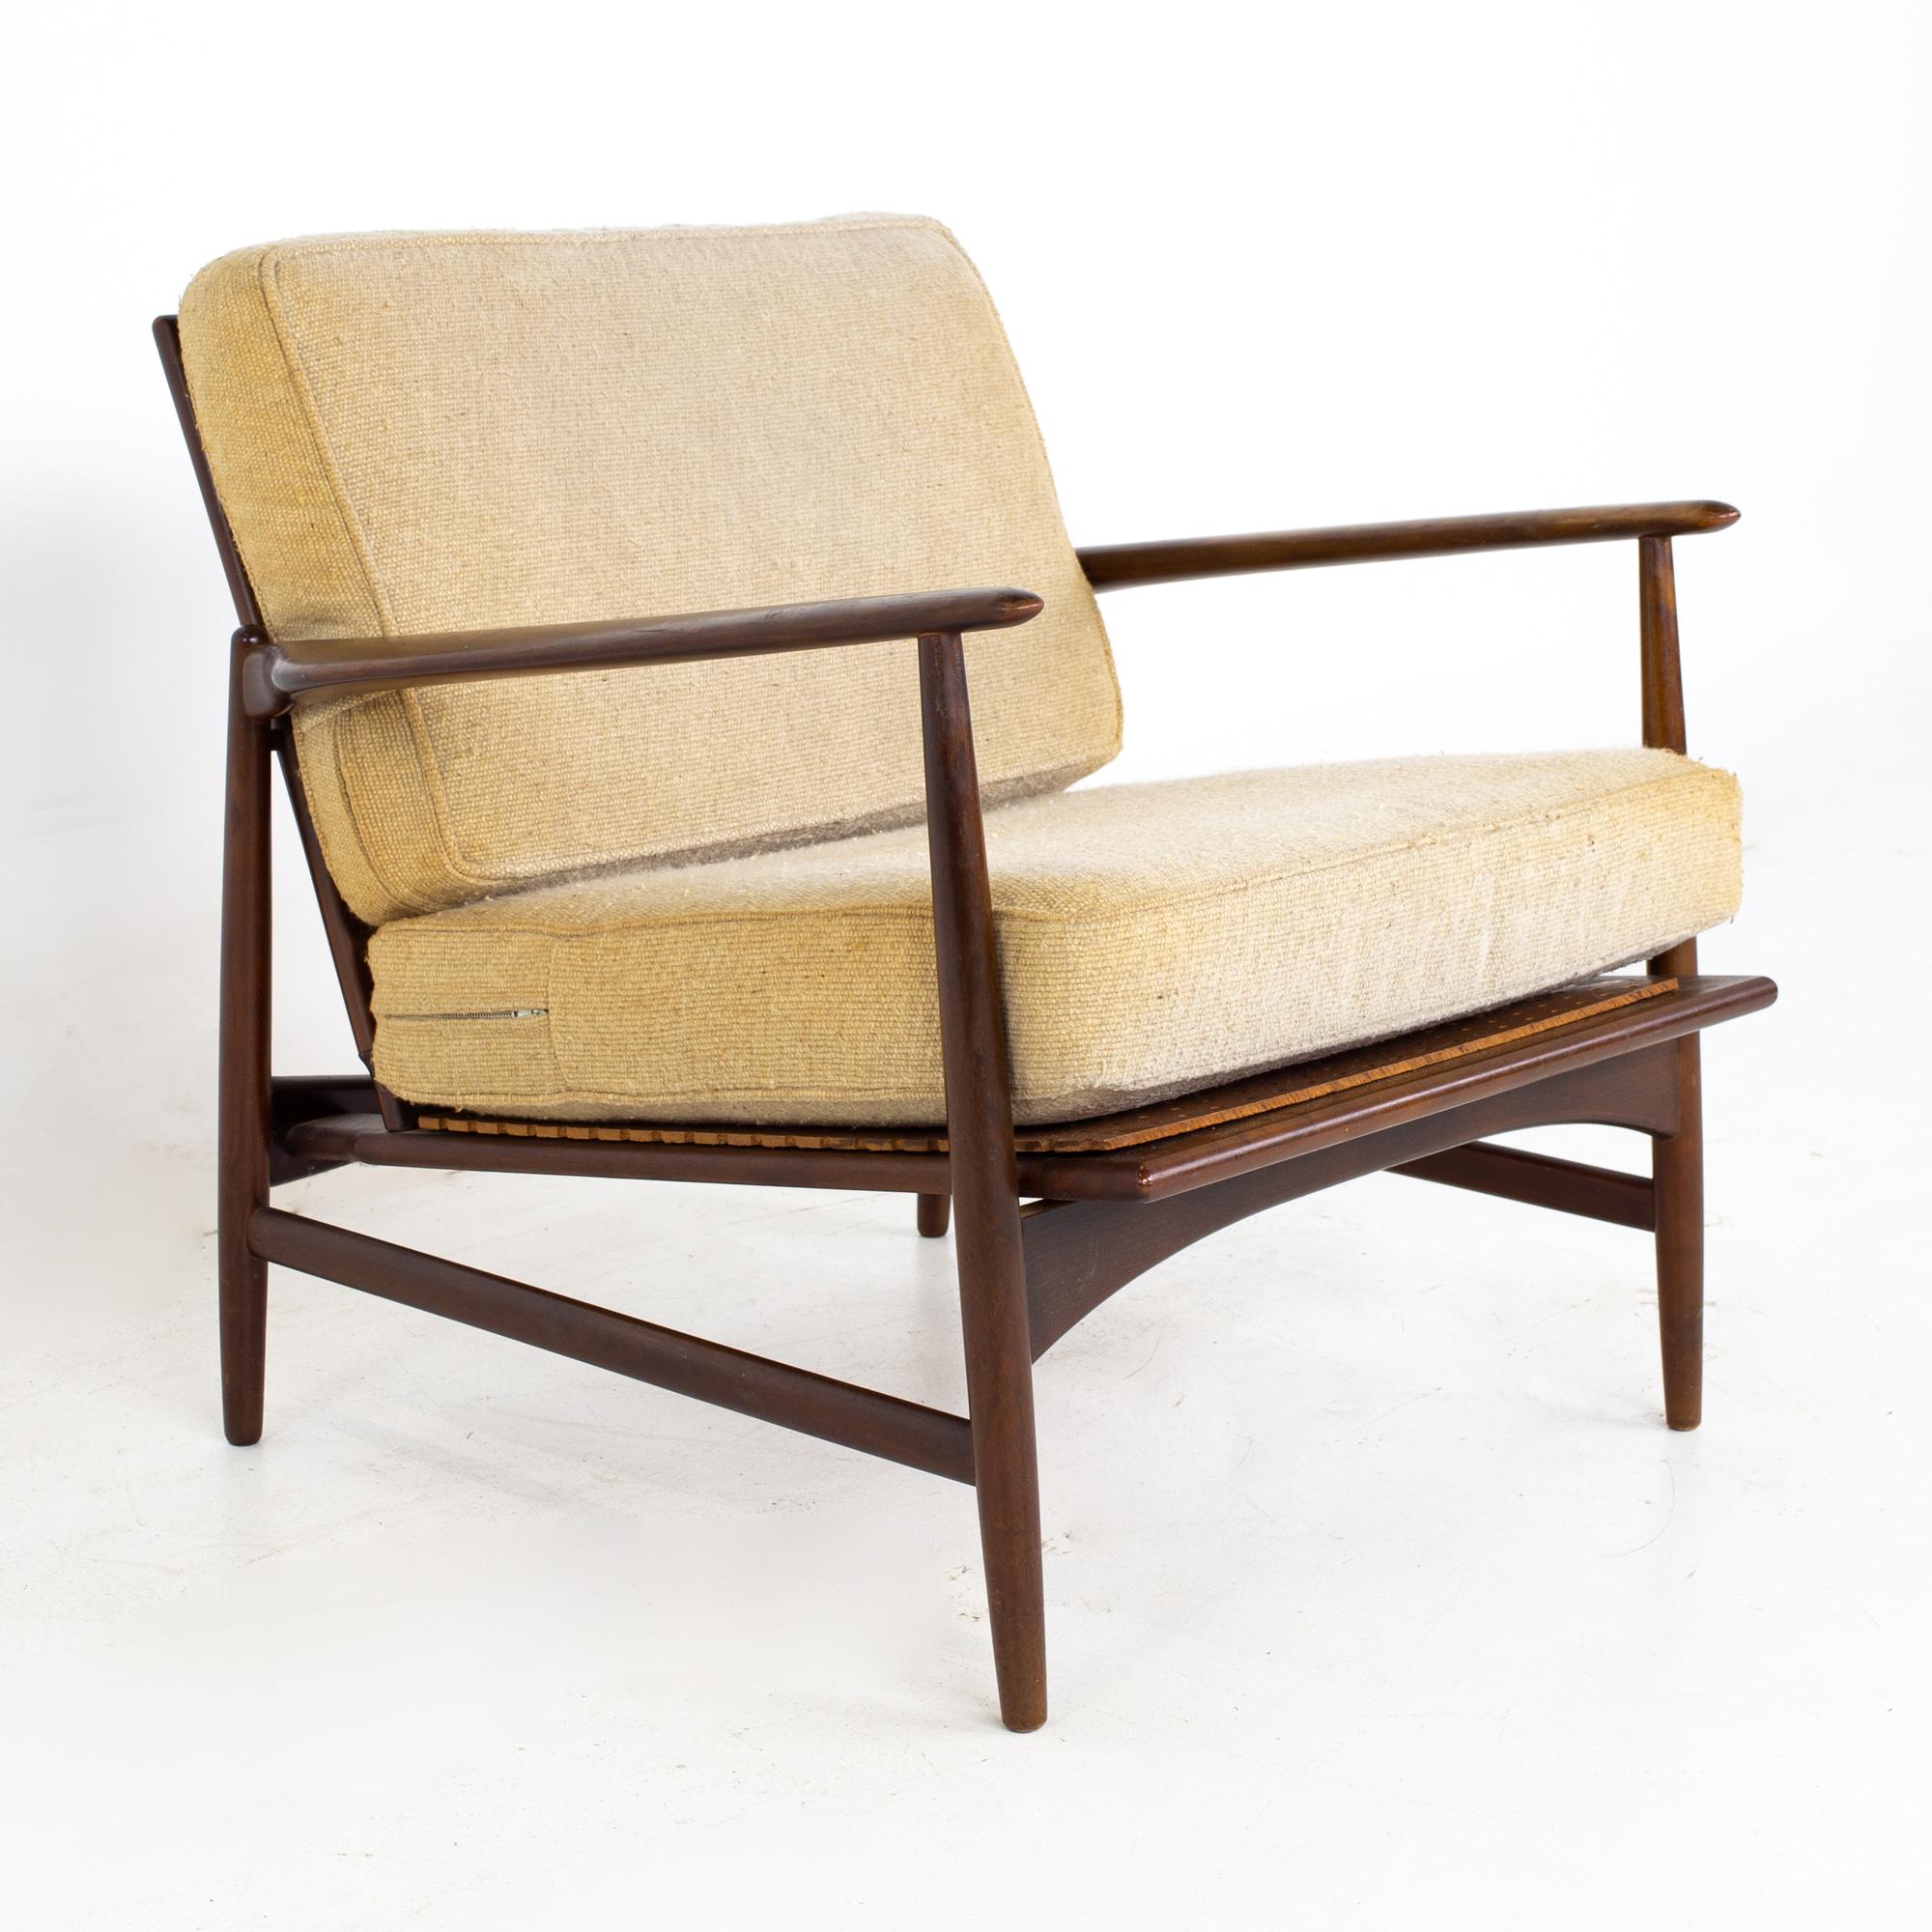 Danish Kofod Larsen for Selig Mid Century Lounge Chairs, a Pair